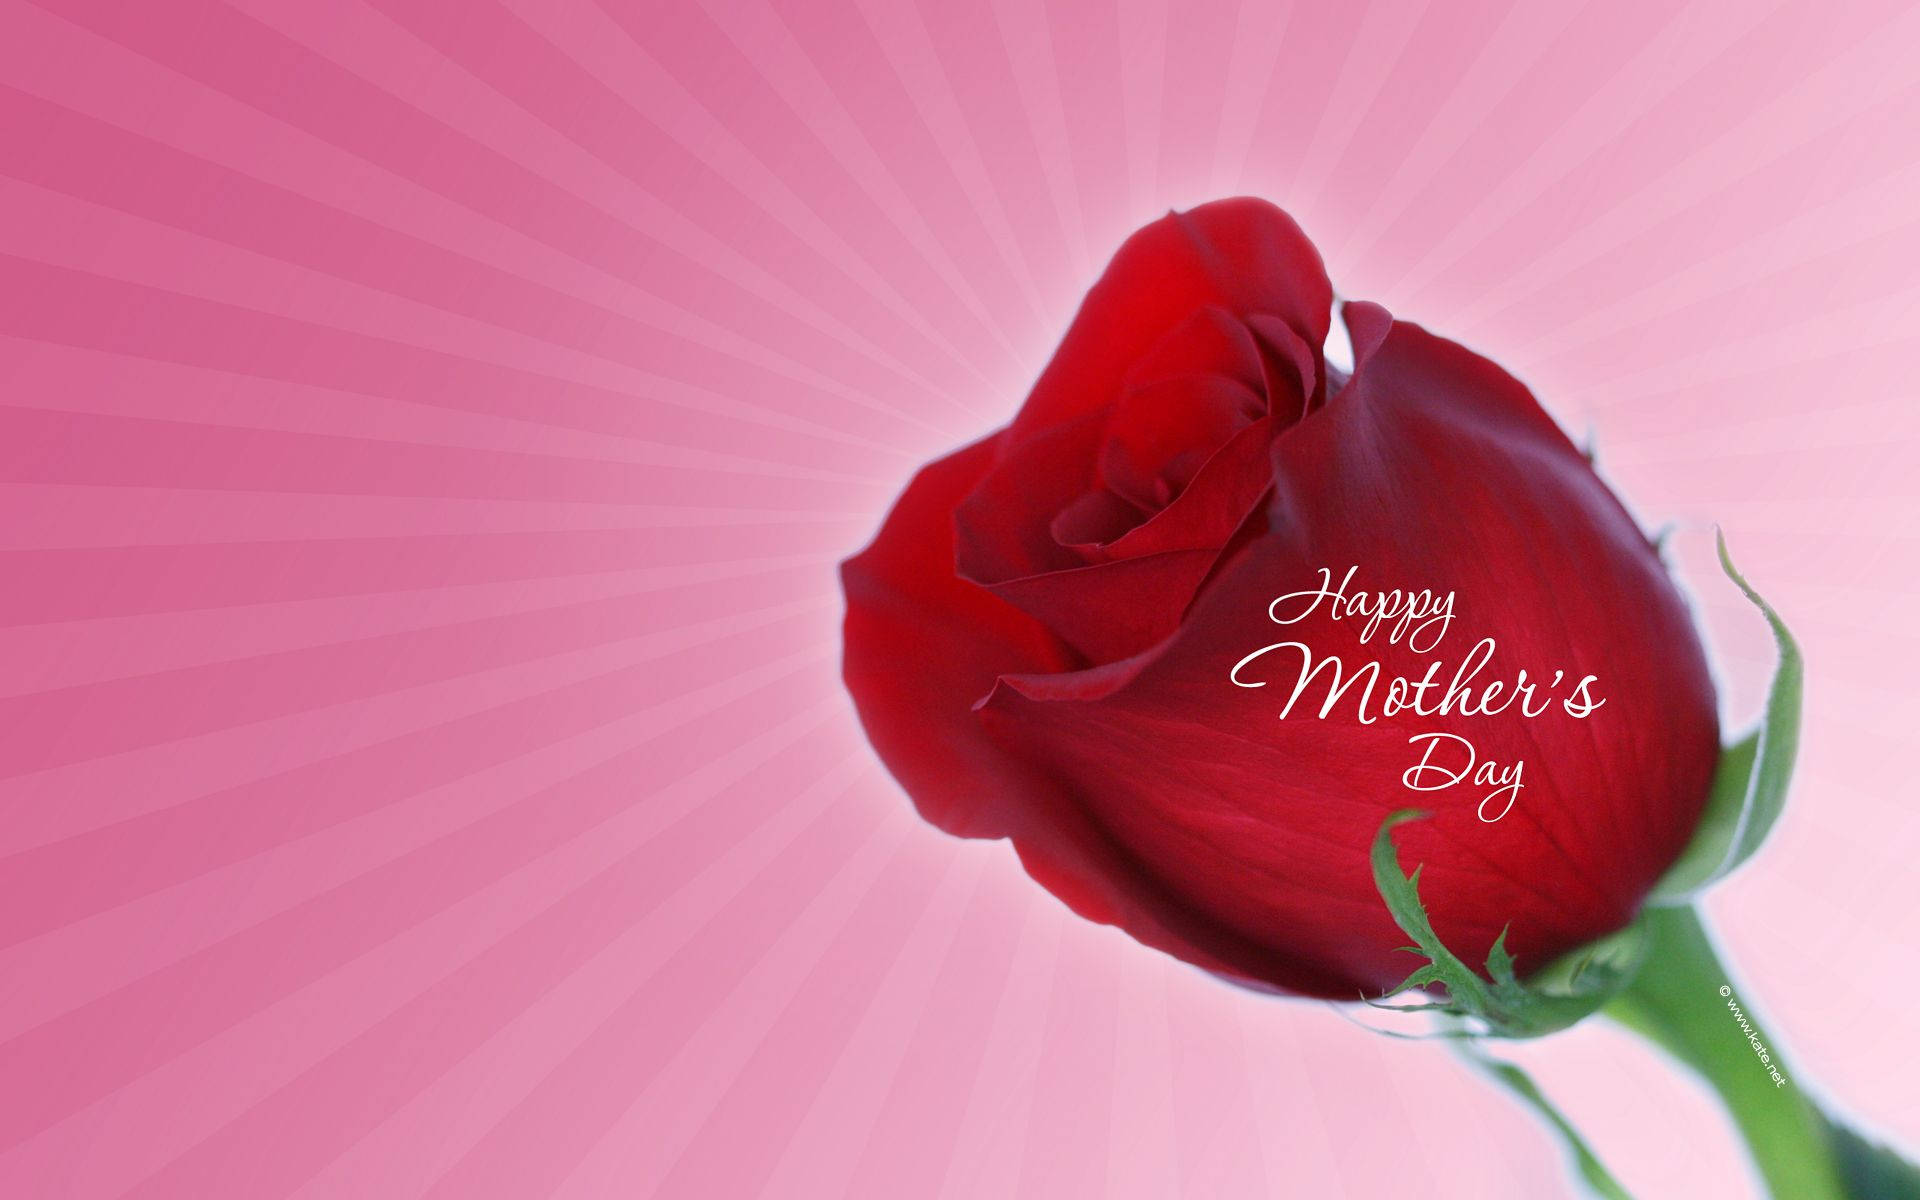 Rose Bud Mothers Day Wallpaper